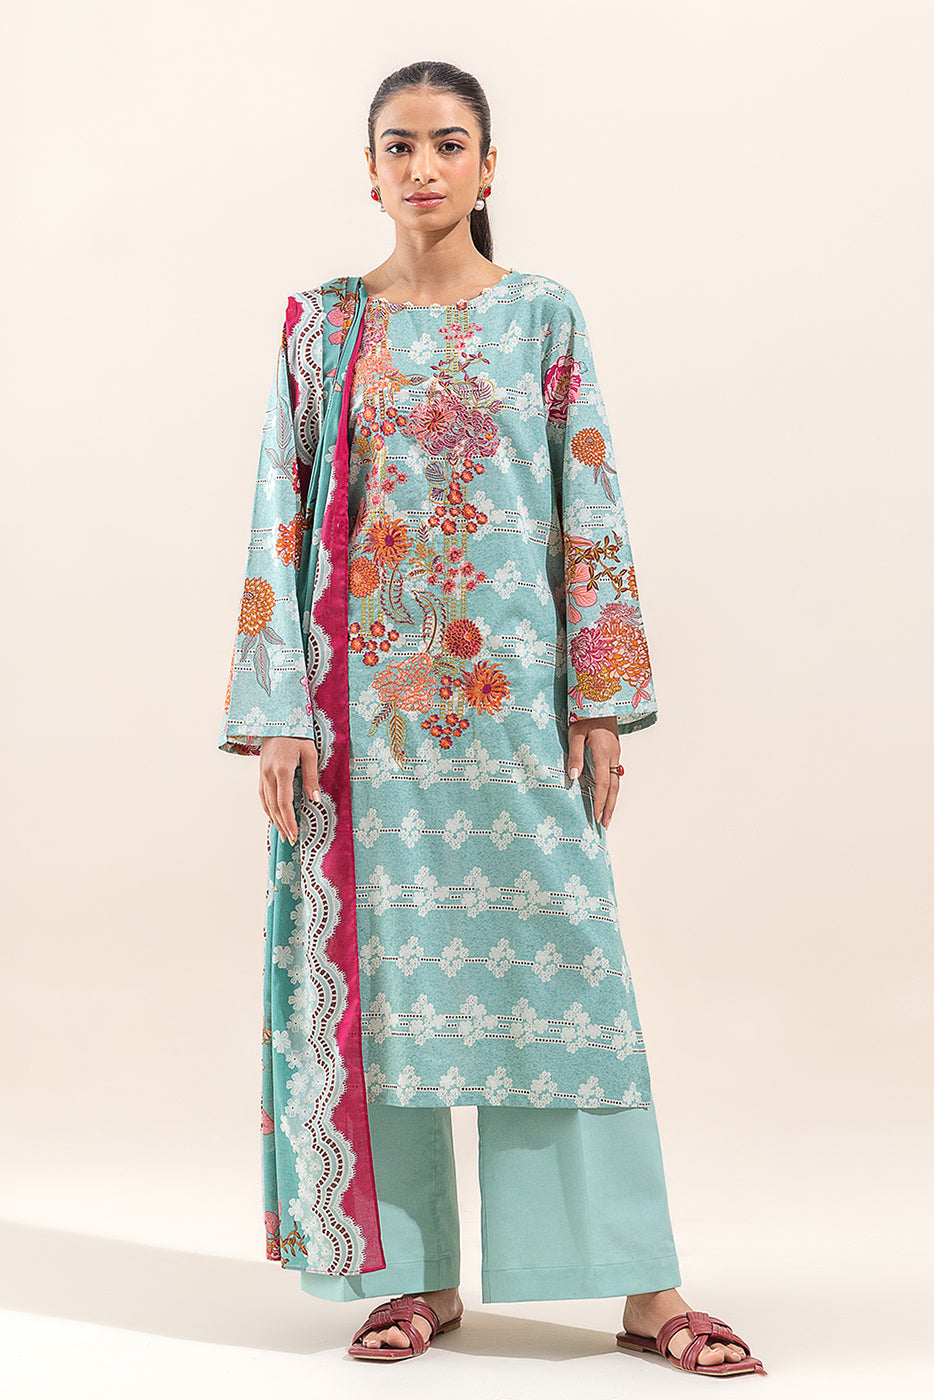 2 PIECE EMBROIDERED LAWN SUIT-DUSTY AQUA (UNSTITCHED)